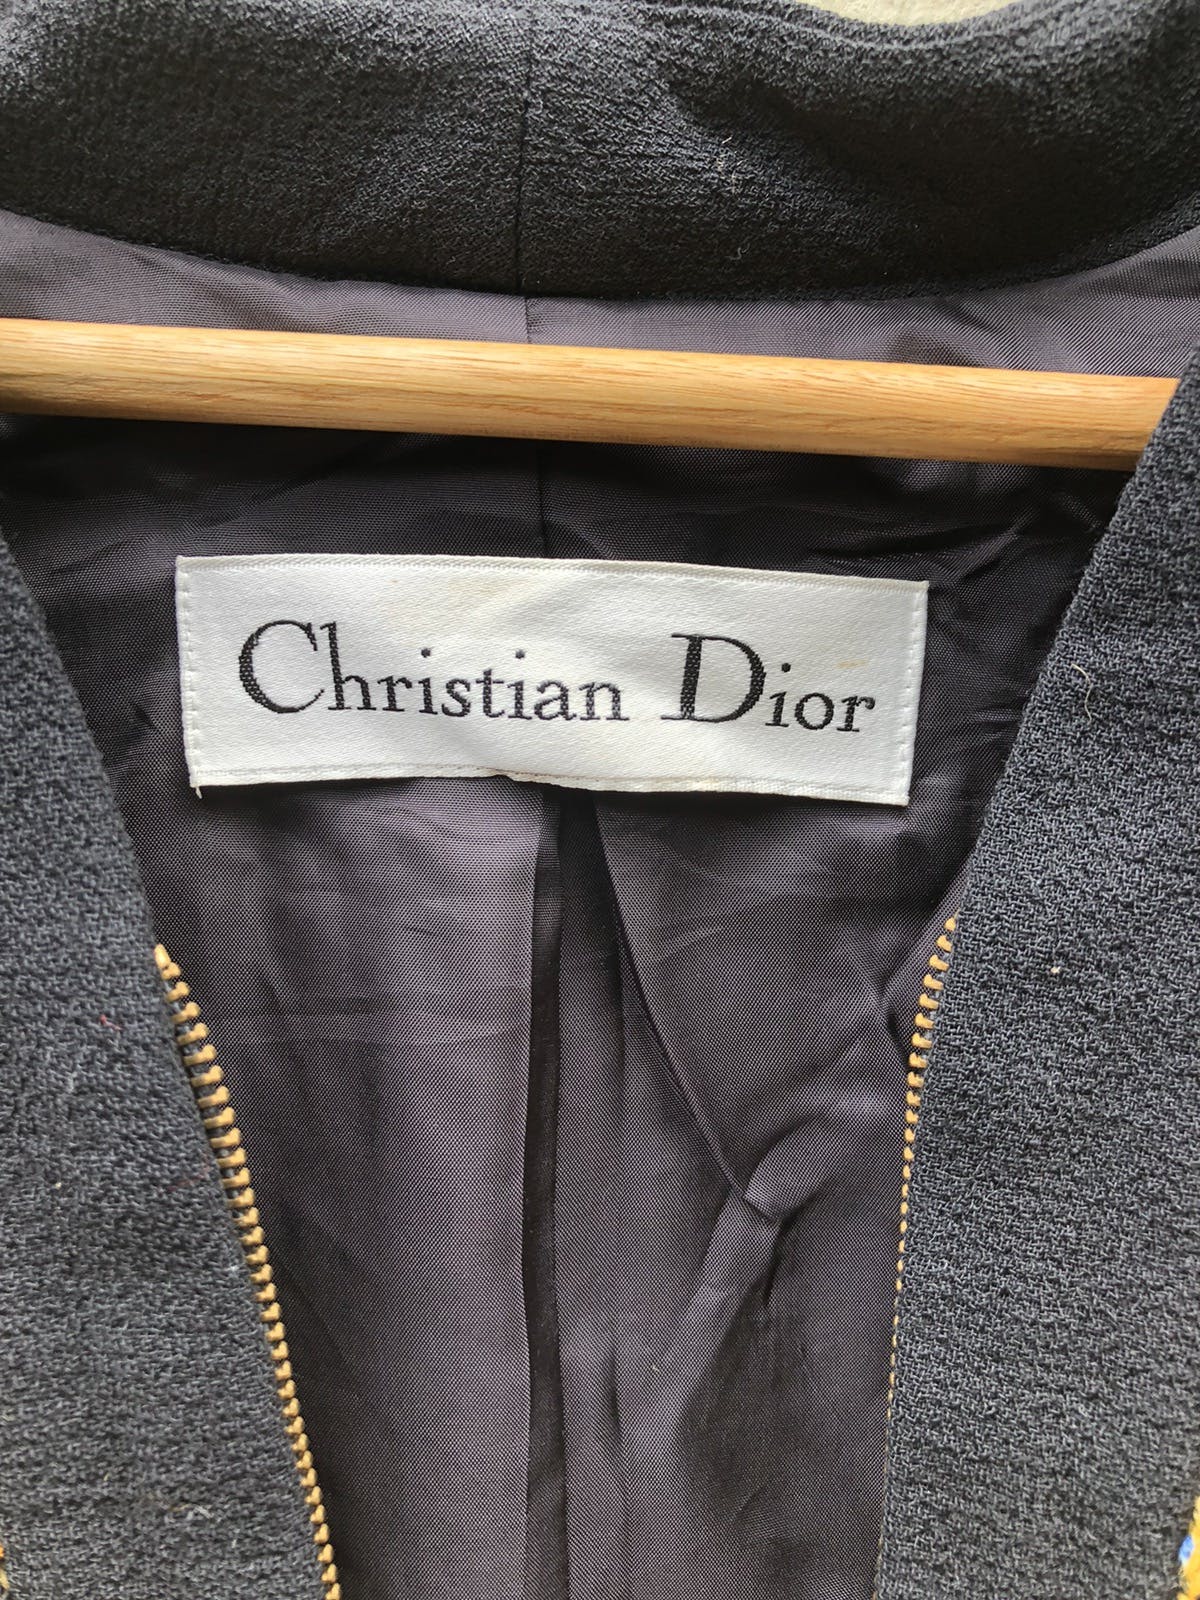 Christian Dior Knitwear Cropped Tweeds Zip up Jackets - 6